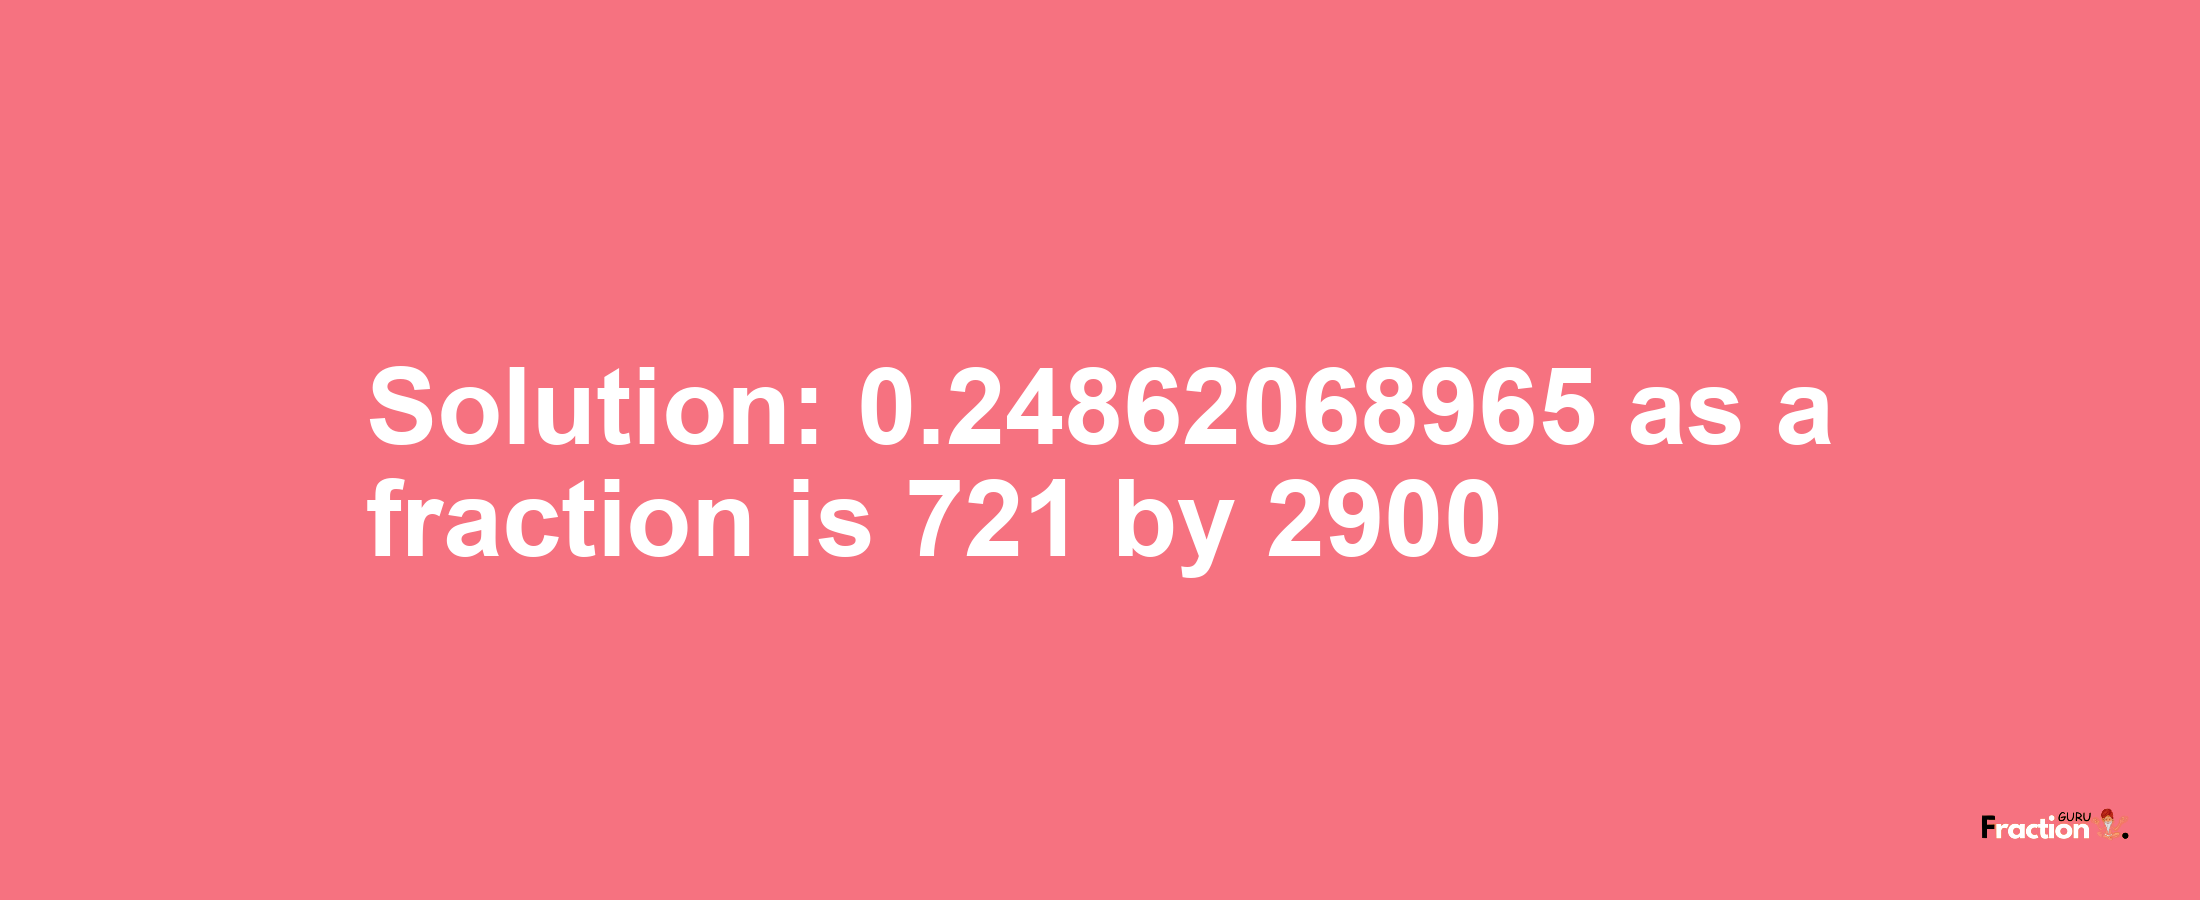 Solution:0.24862068965 as a fraction is 721/2900